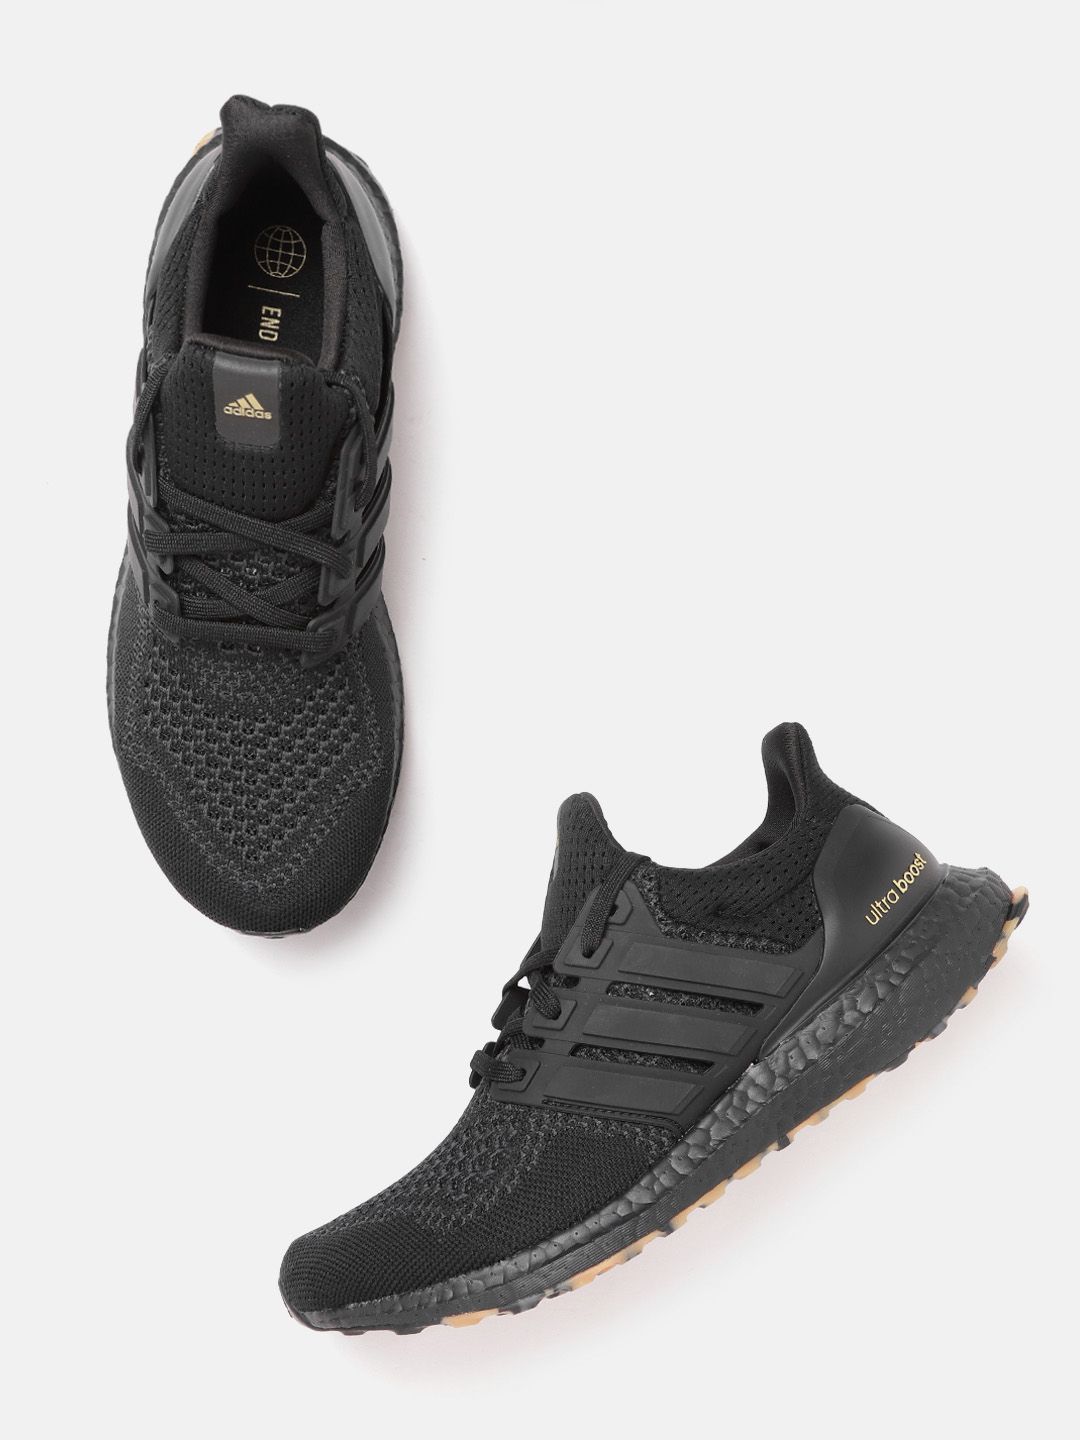 ADIDAS Unisex Black Woven Design Ultraboost 1.0 Running Shoes Price in India